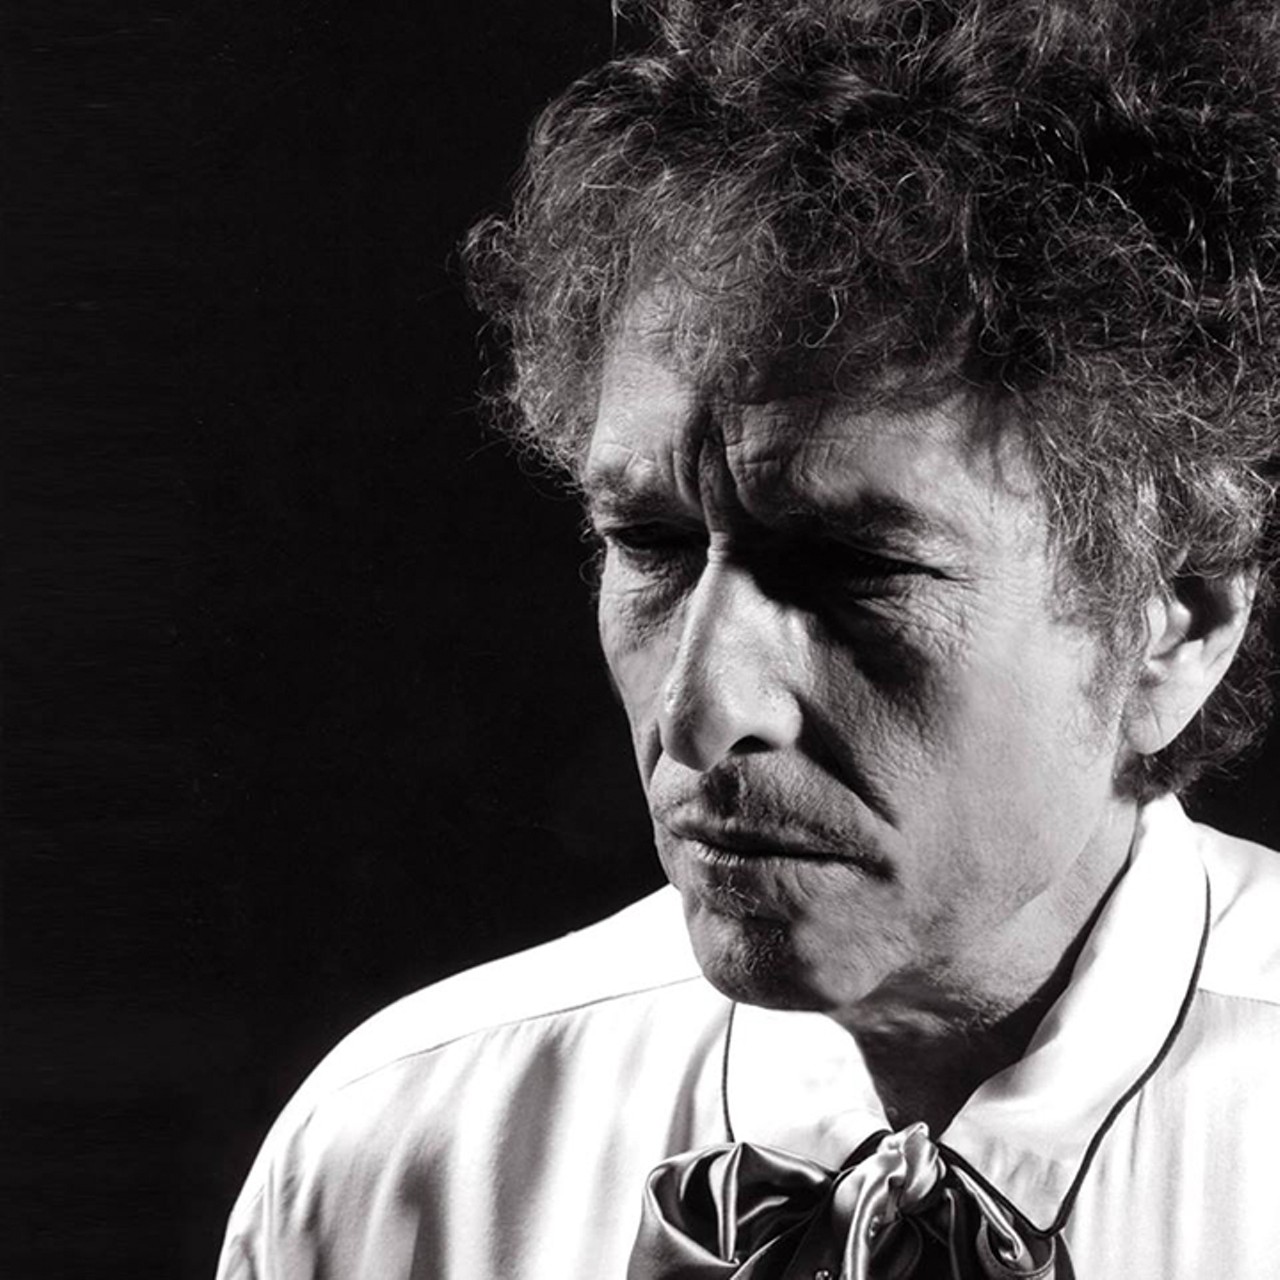 Friday, Oct. 26Bob Dylan & His Band at the Dr. Phillips Center